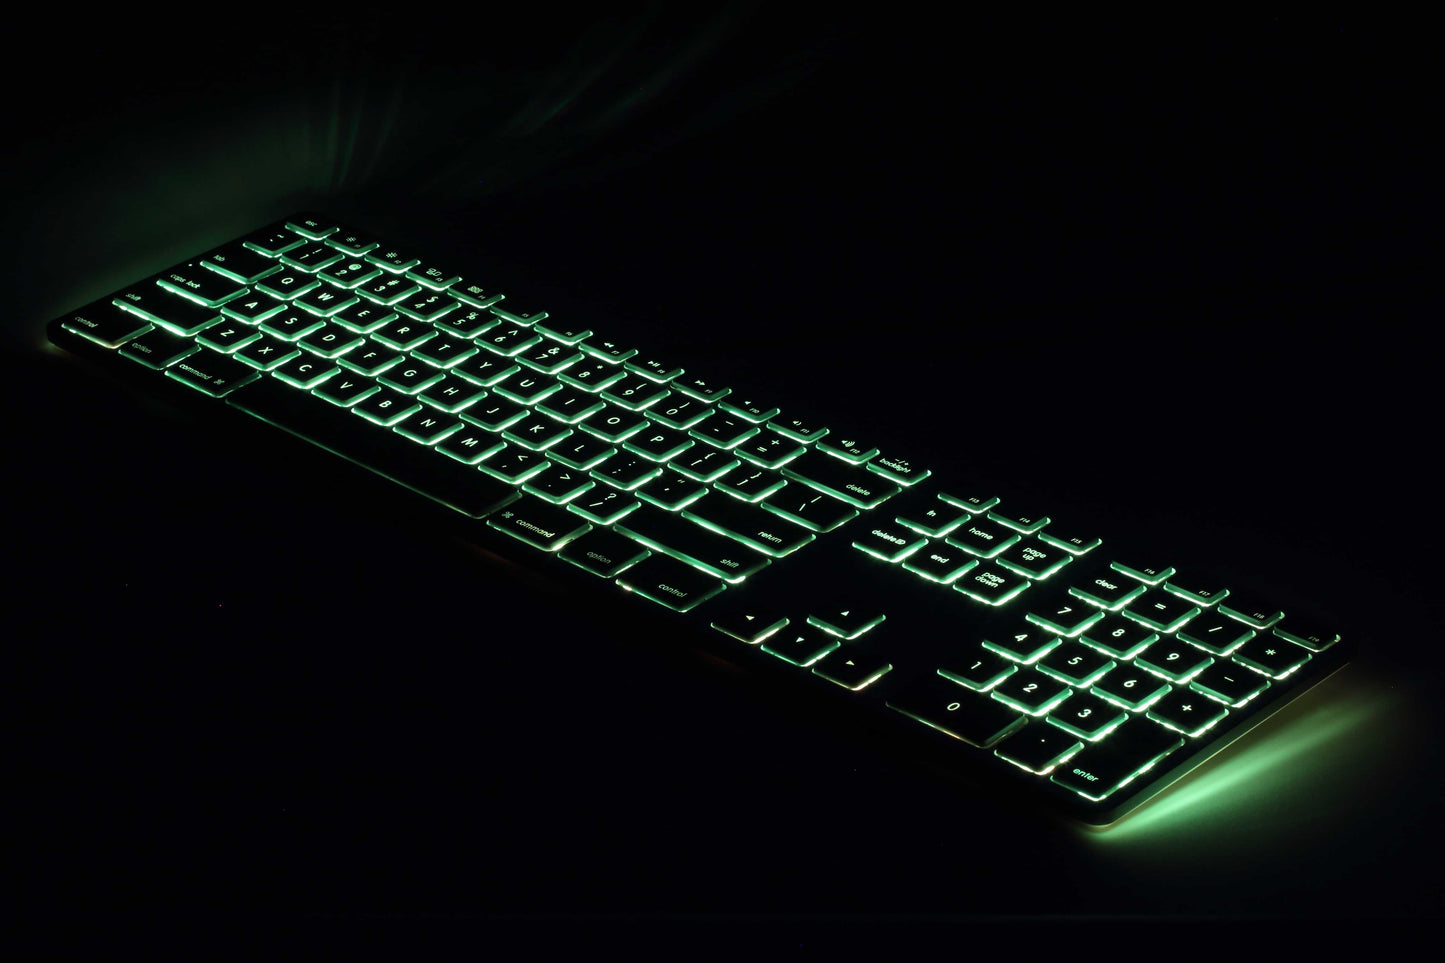 RGB Backlit Wired Aluminum Keyboard for Mac - Silver